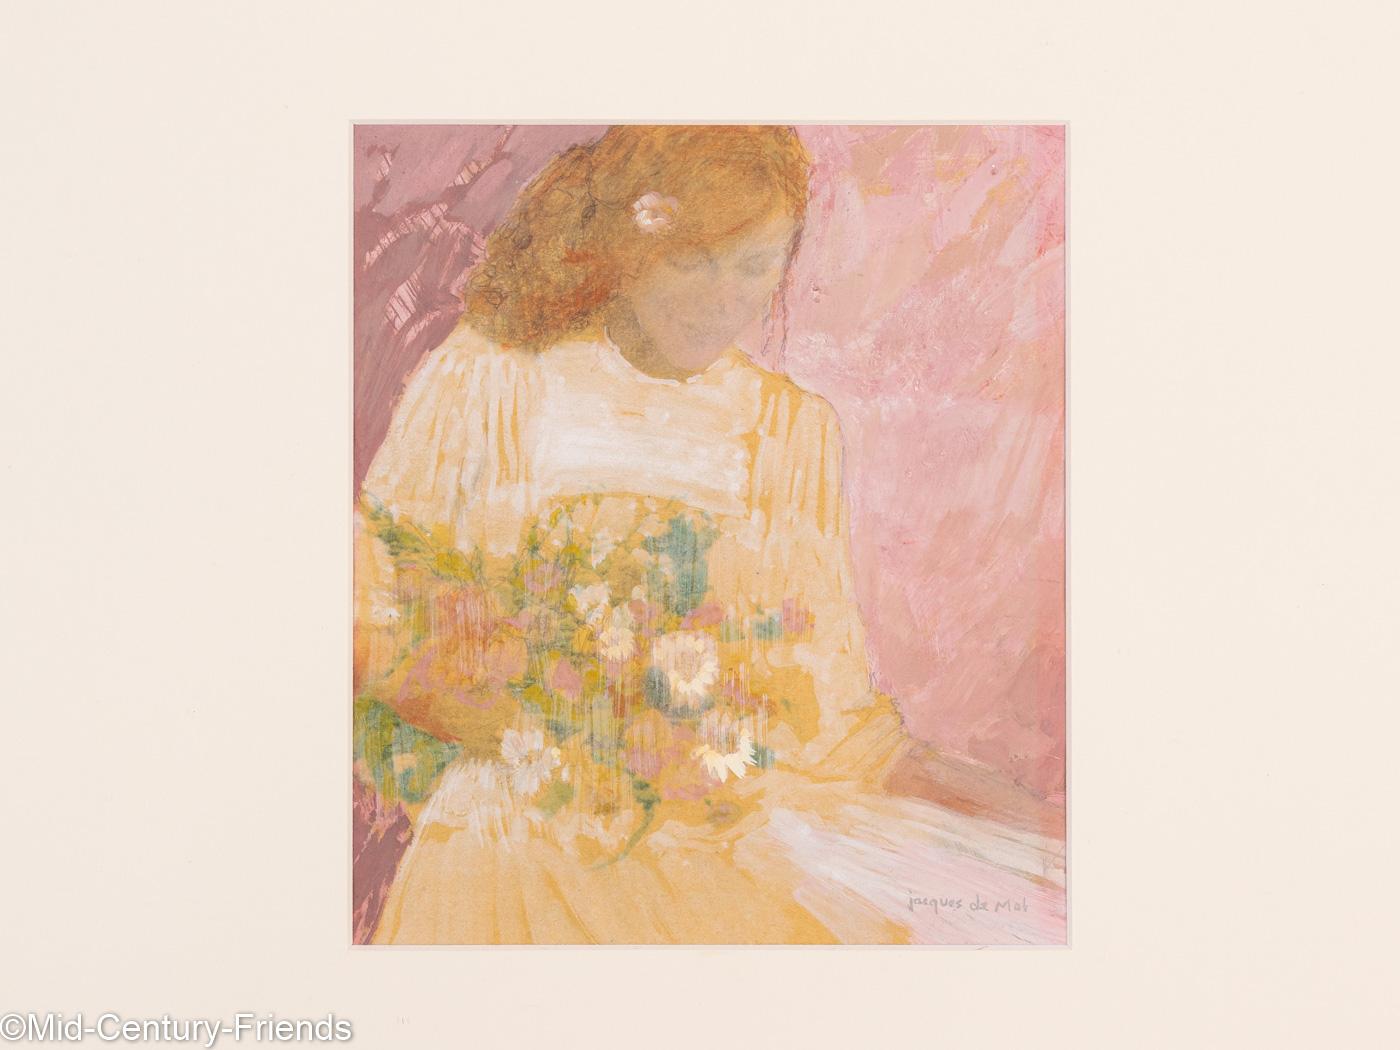 Lady with flowers. Gouache on cardboard in pastel tones. Ready to hang, framed with a passepartout in an ash wood picture frame behind anti-reflective acrylic glass.
Size without frame: W 18 cm x H 21 cm.